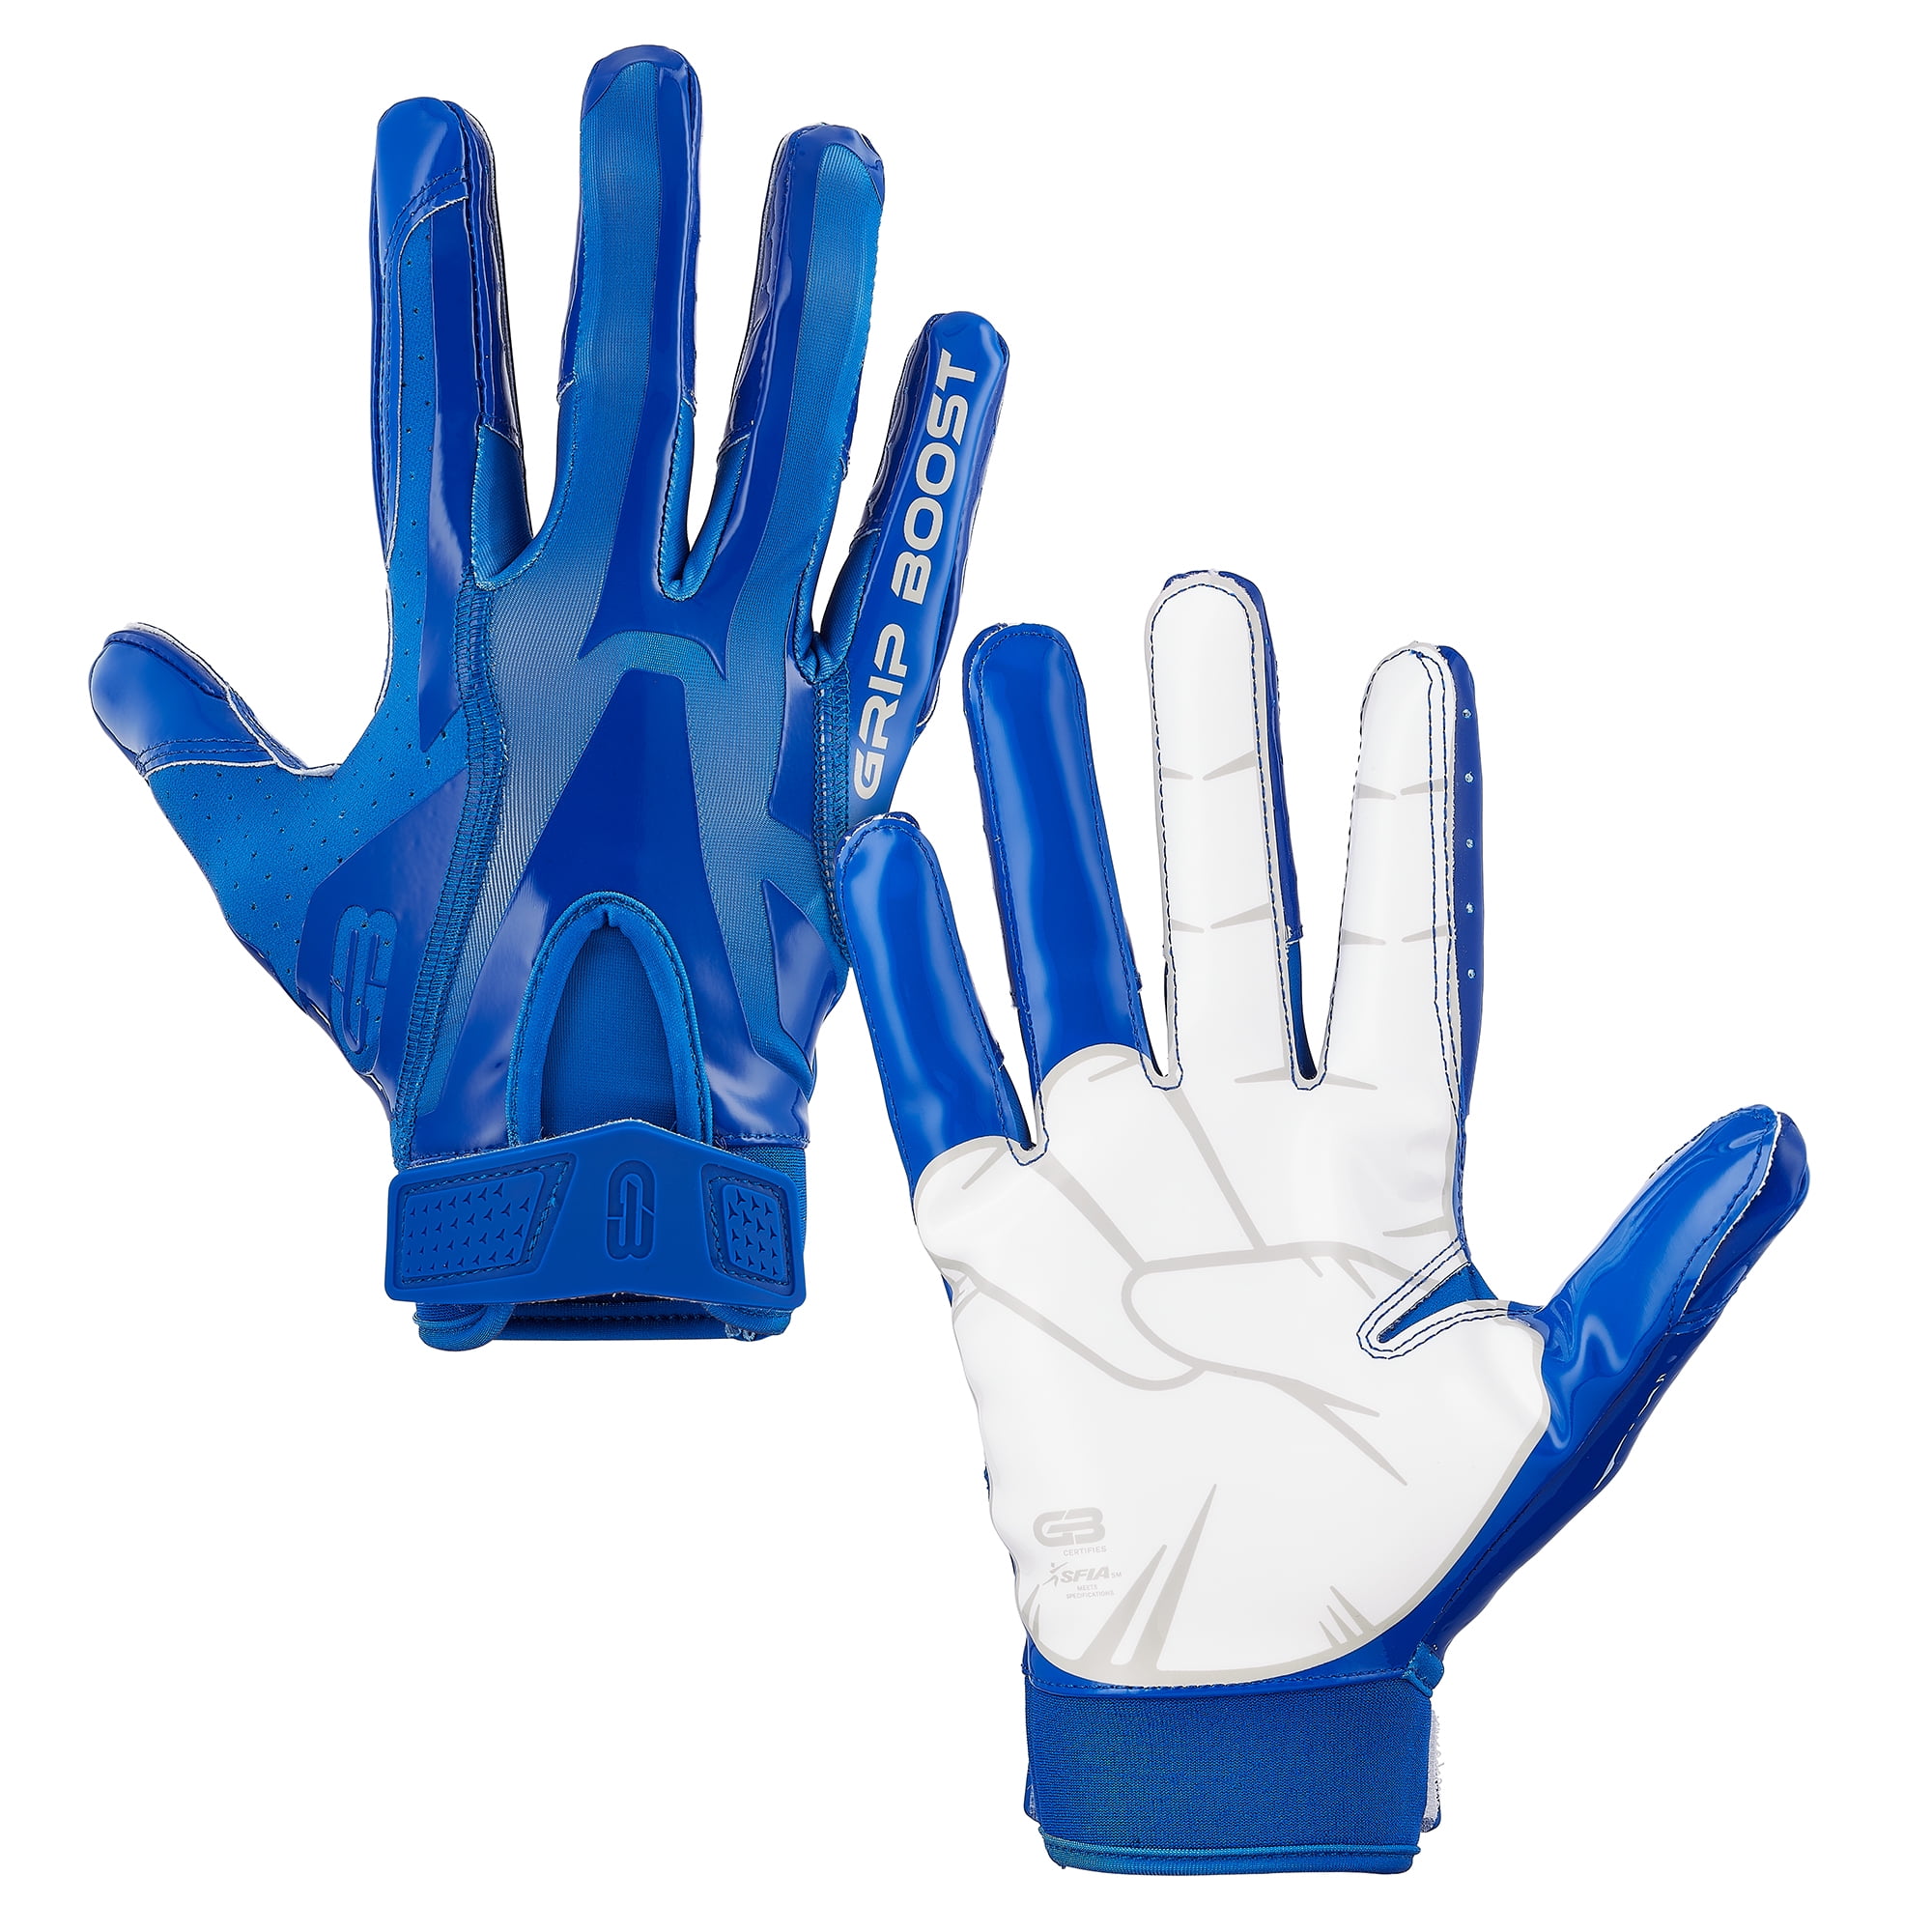 Grip The Greatness - Football Gloves & More